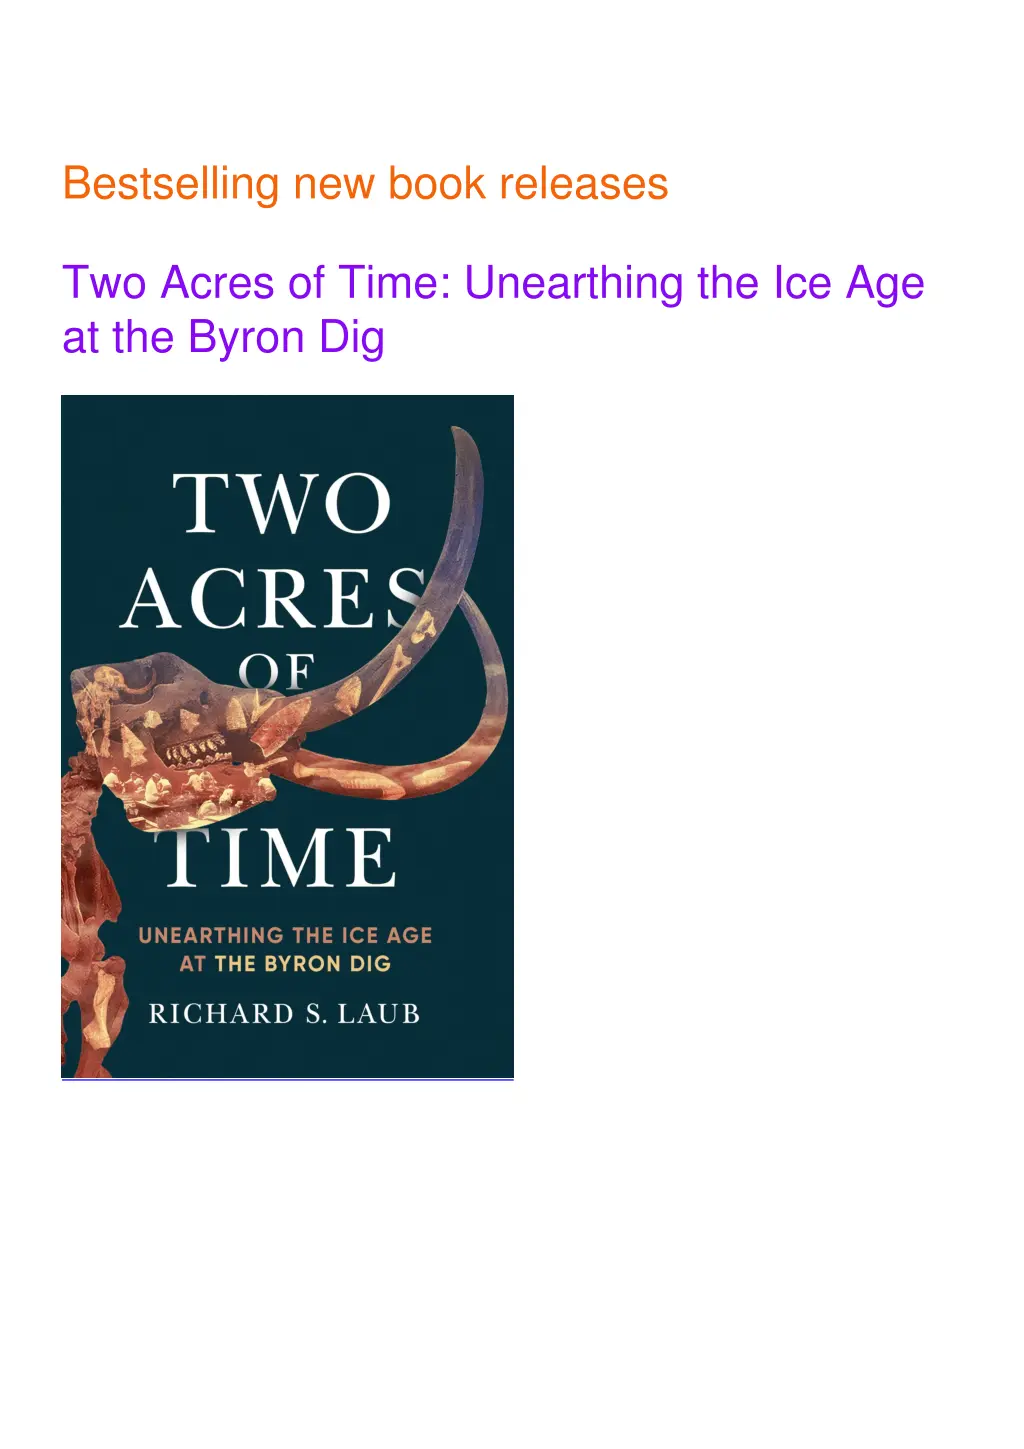 bestselling new book releases two acres of time